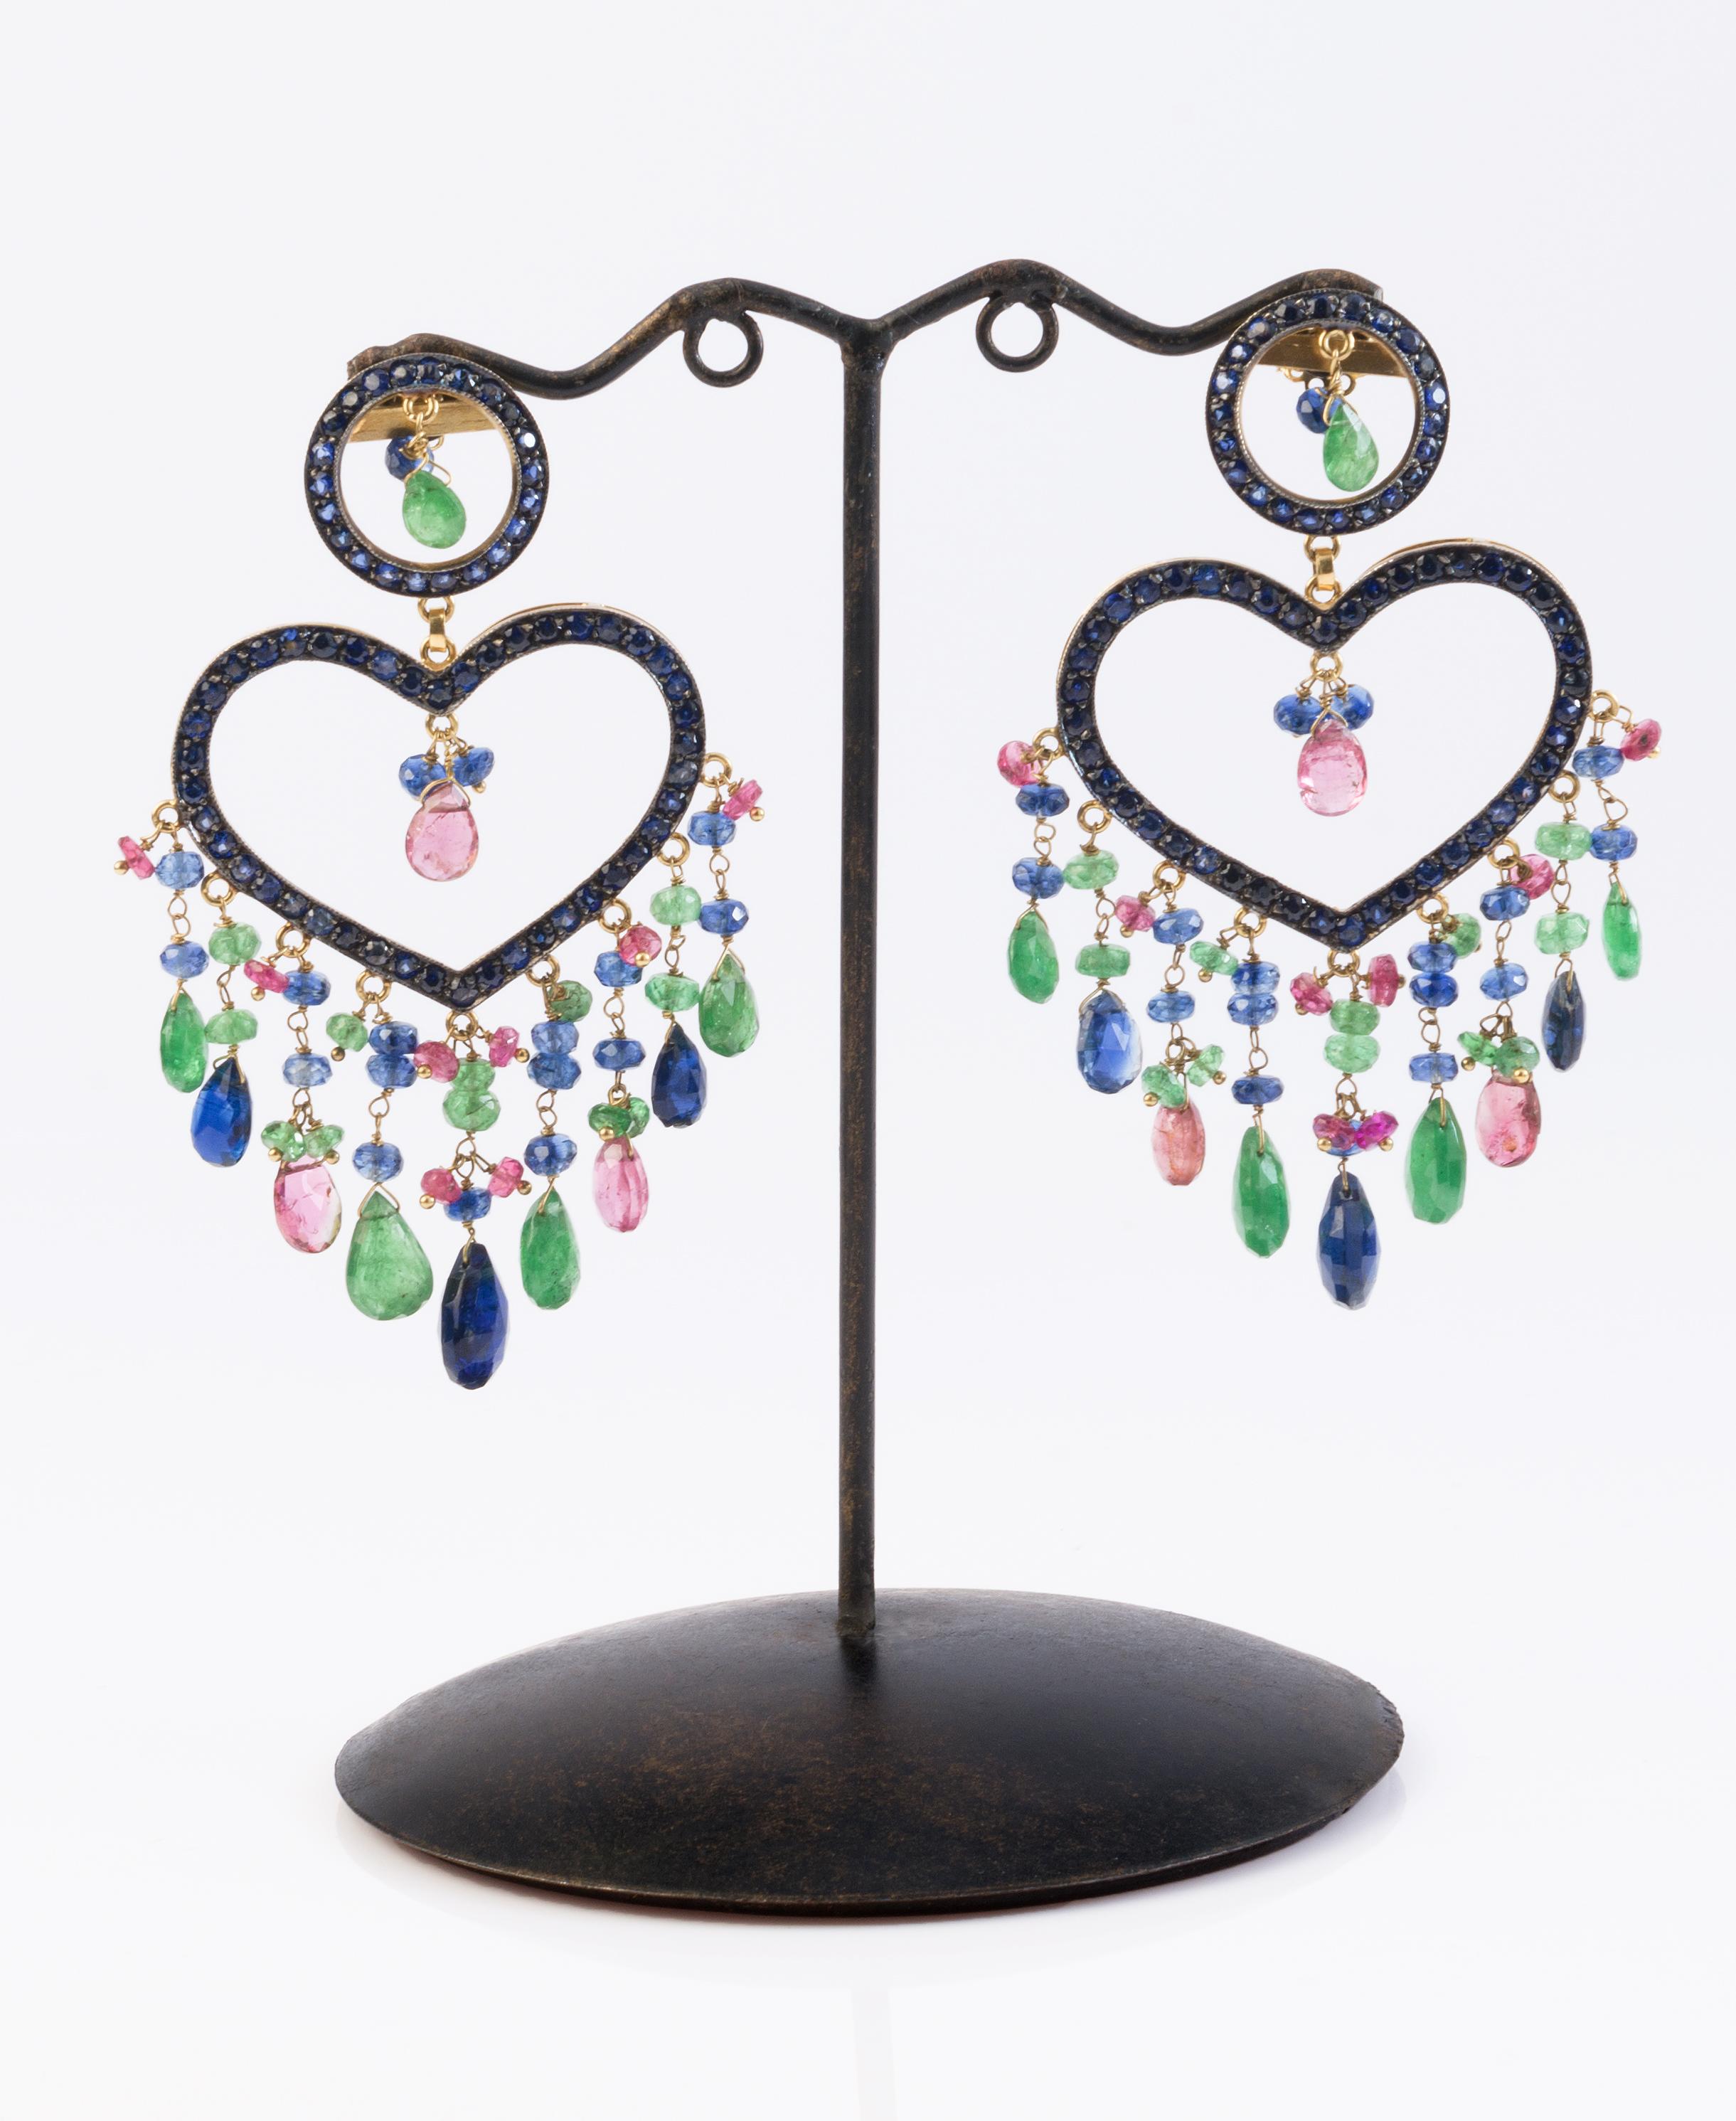 Big Heart earring with  pink sapphires, emeralds,  blue sapphires and black diamonds in silver and gold.
Artisanal unique piece handcrafted in Italy. 